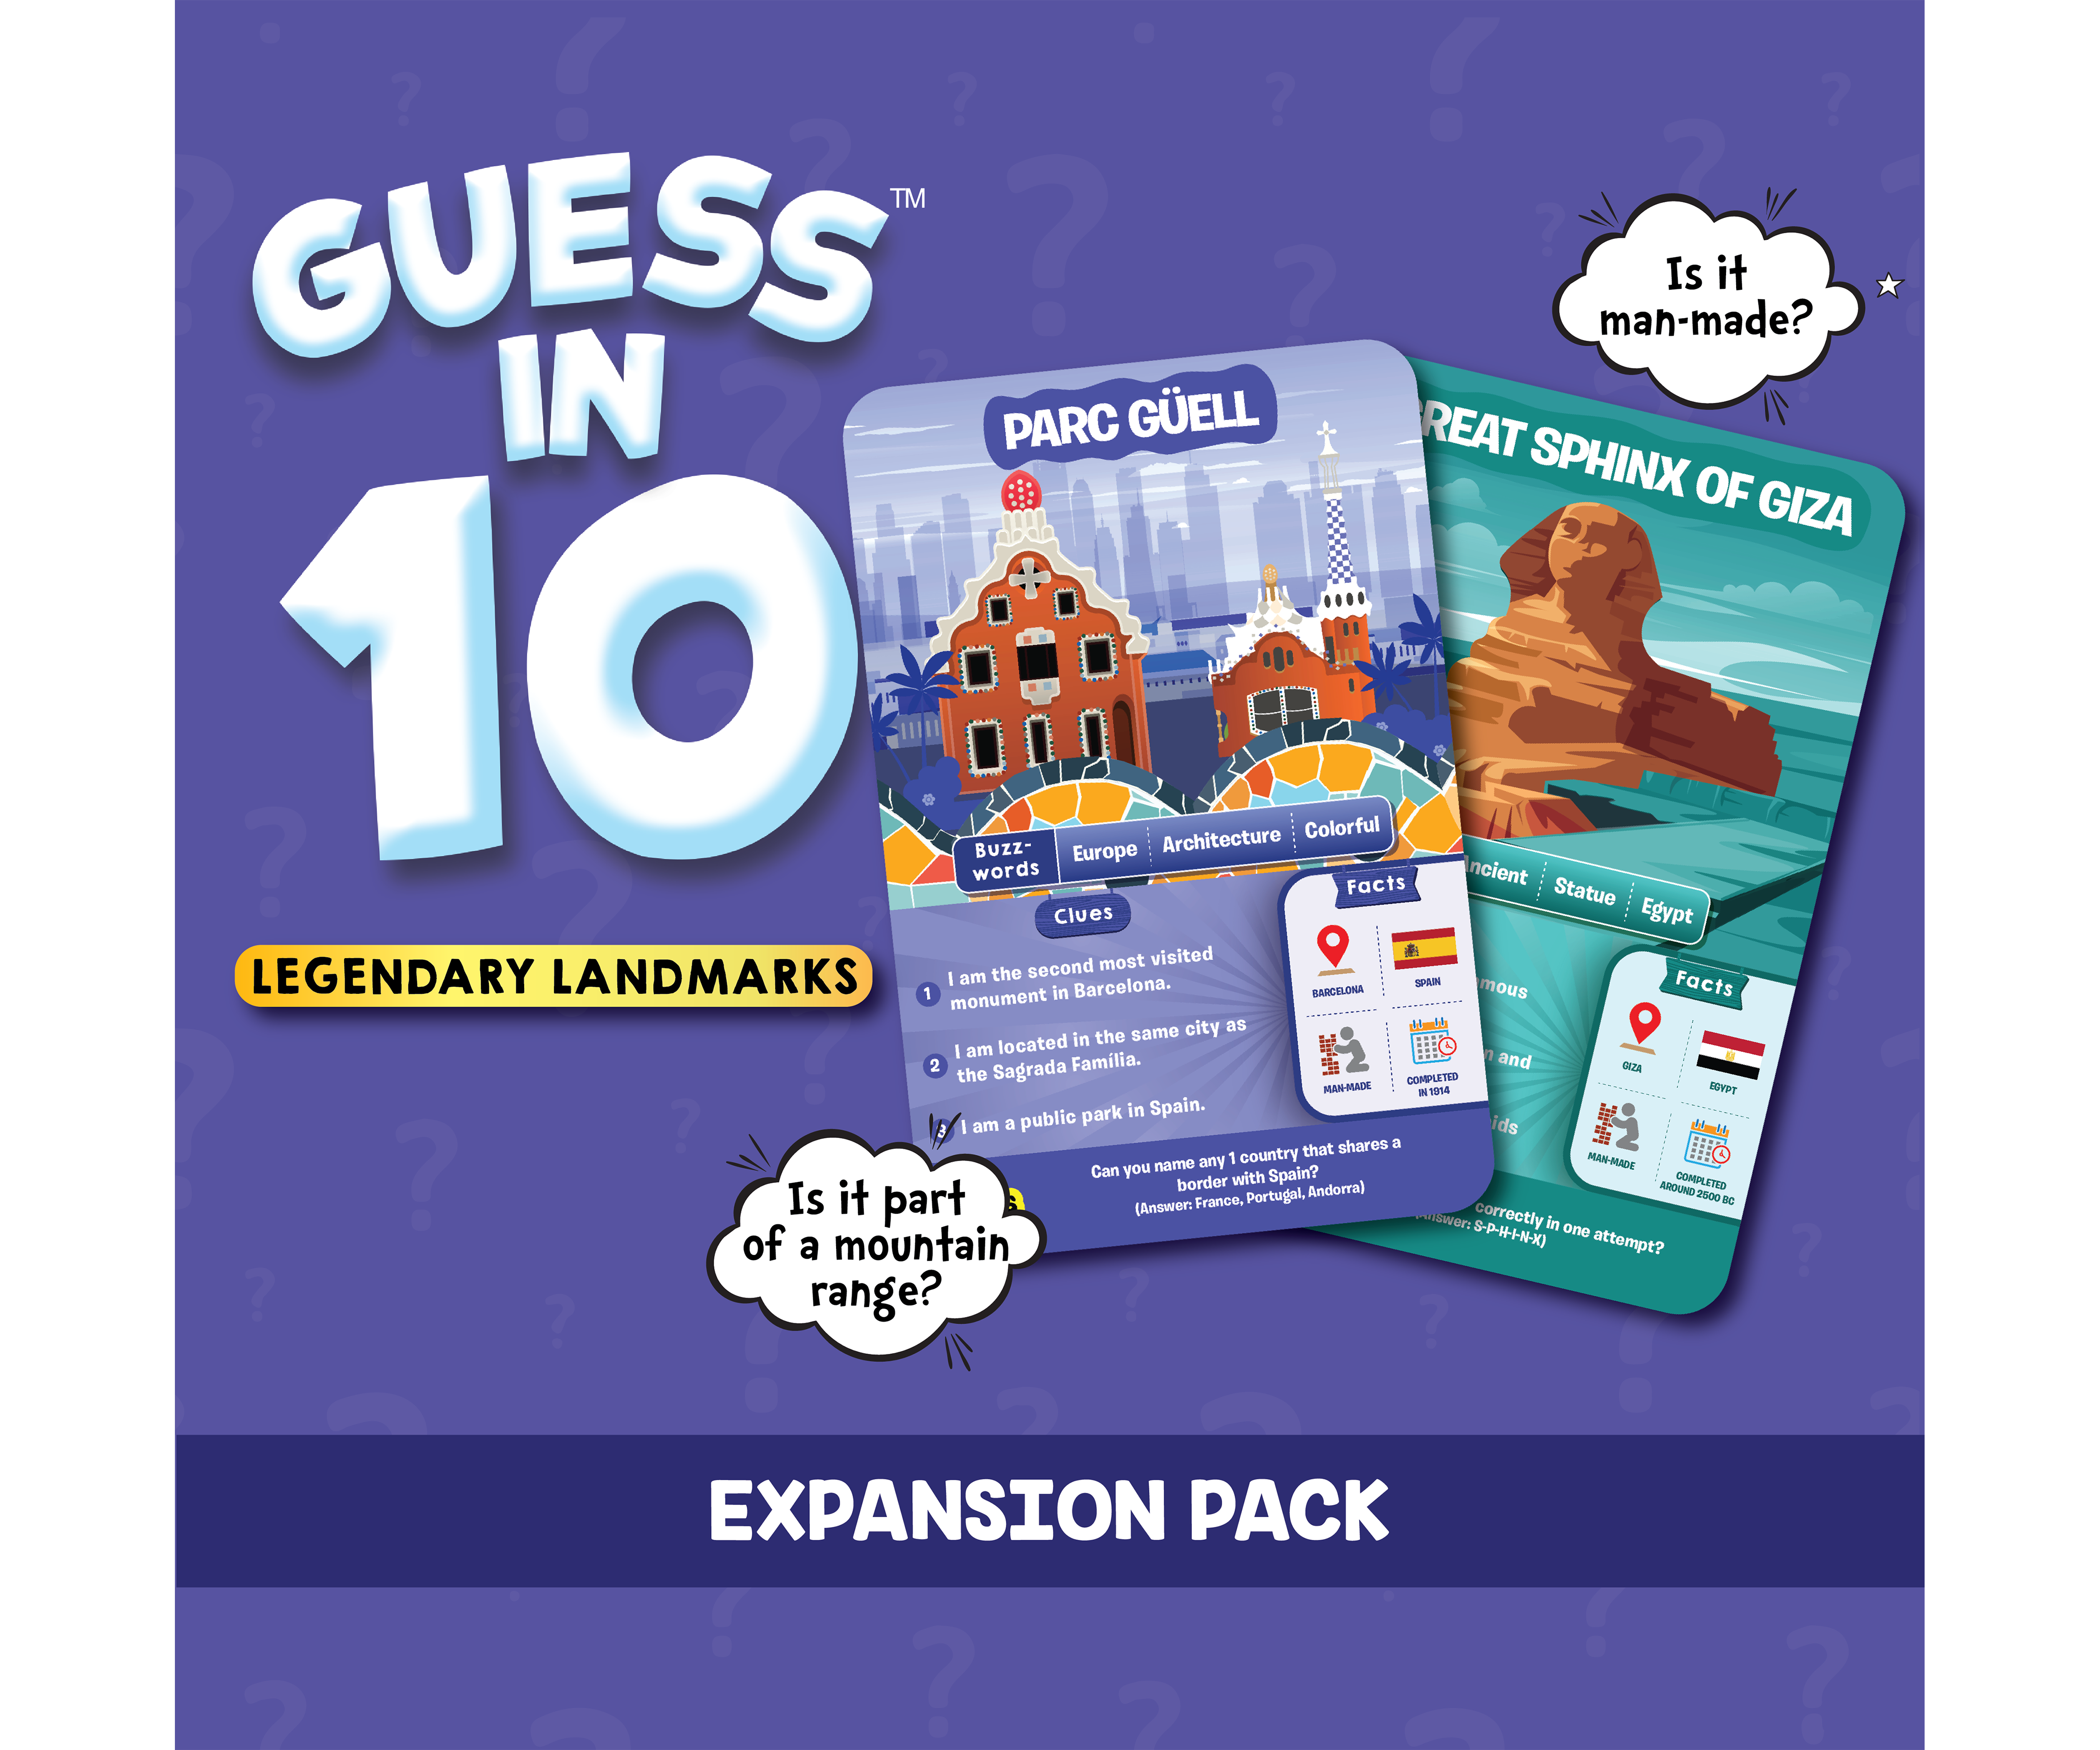 Guess in 10 Legendary Landmarks - Downloadable Expansion Pack